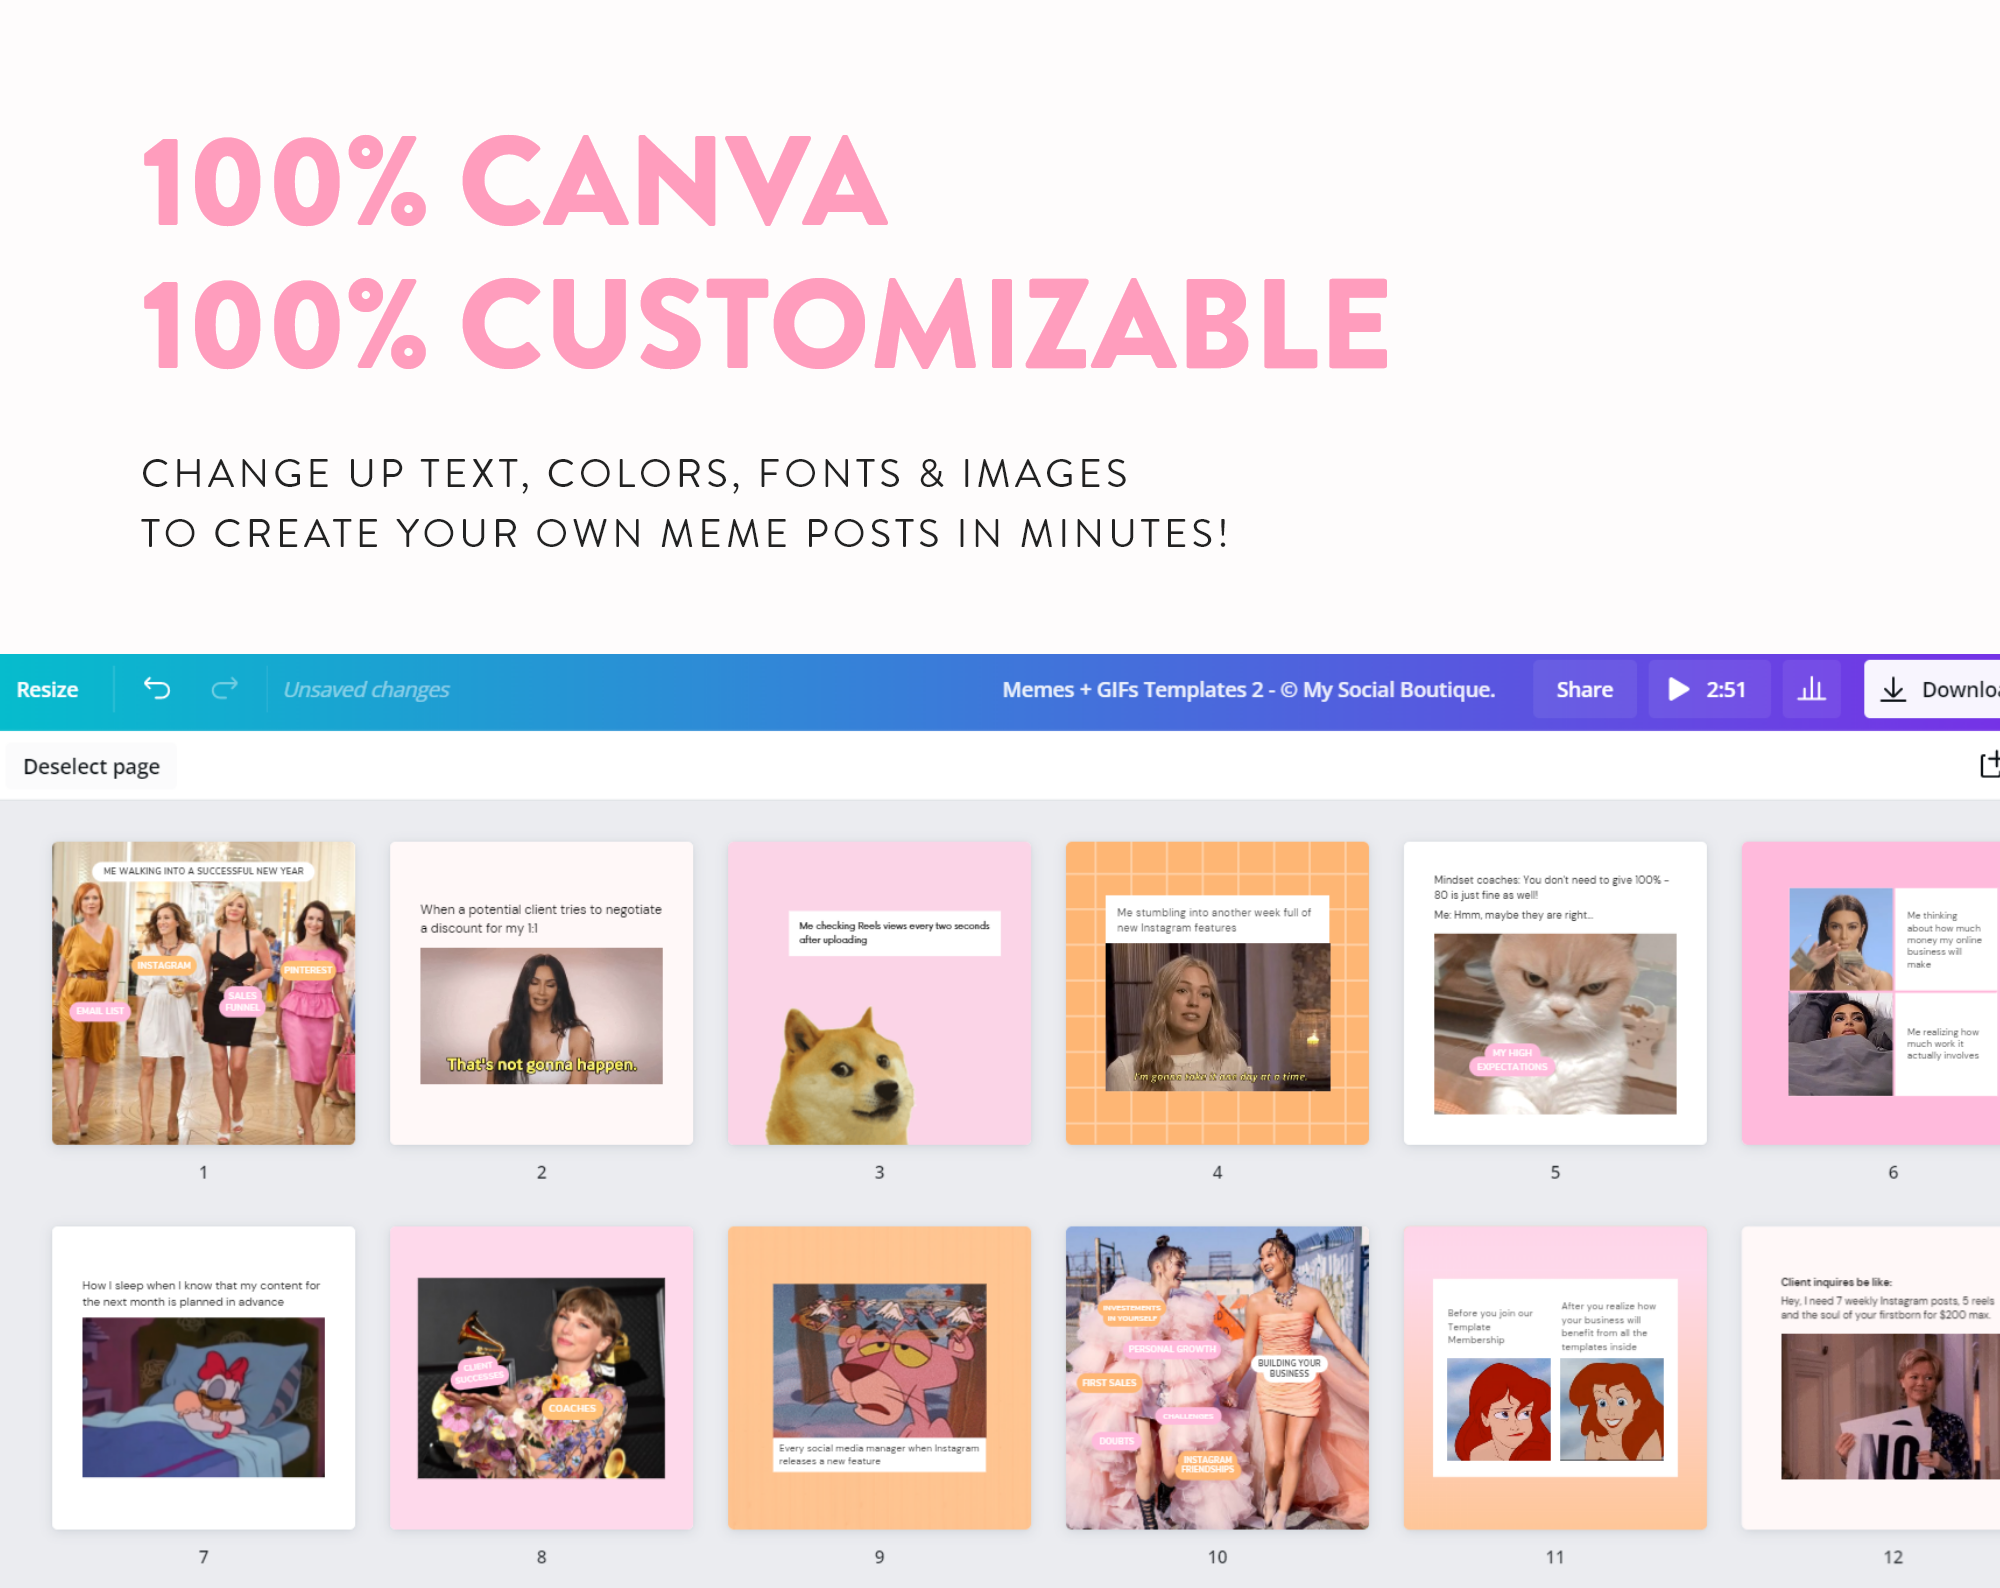 memes-gifs-Instagram-feed-post-templates-canva-customizable-6-2